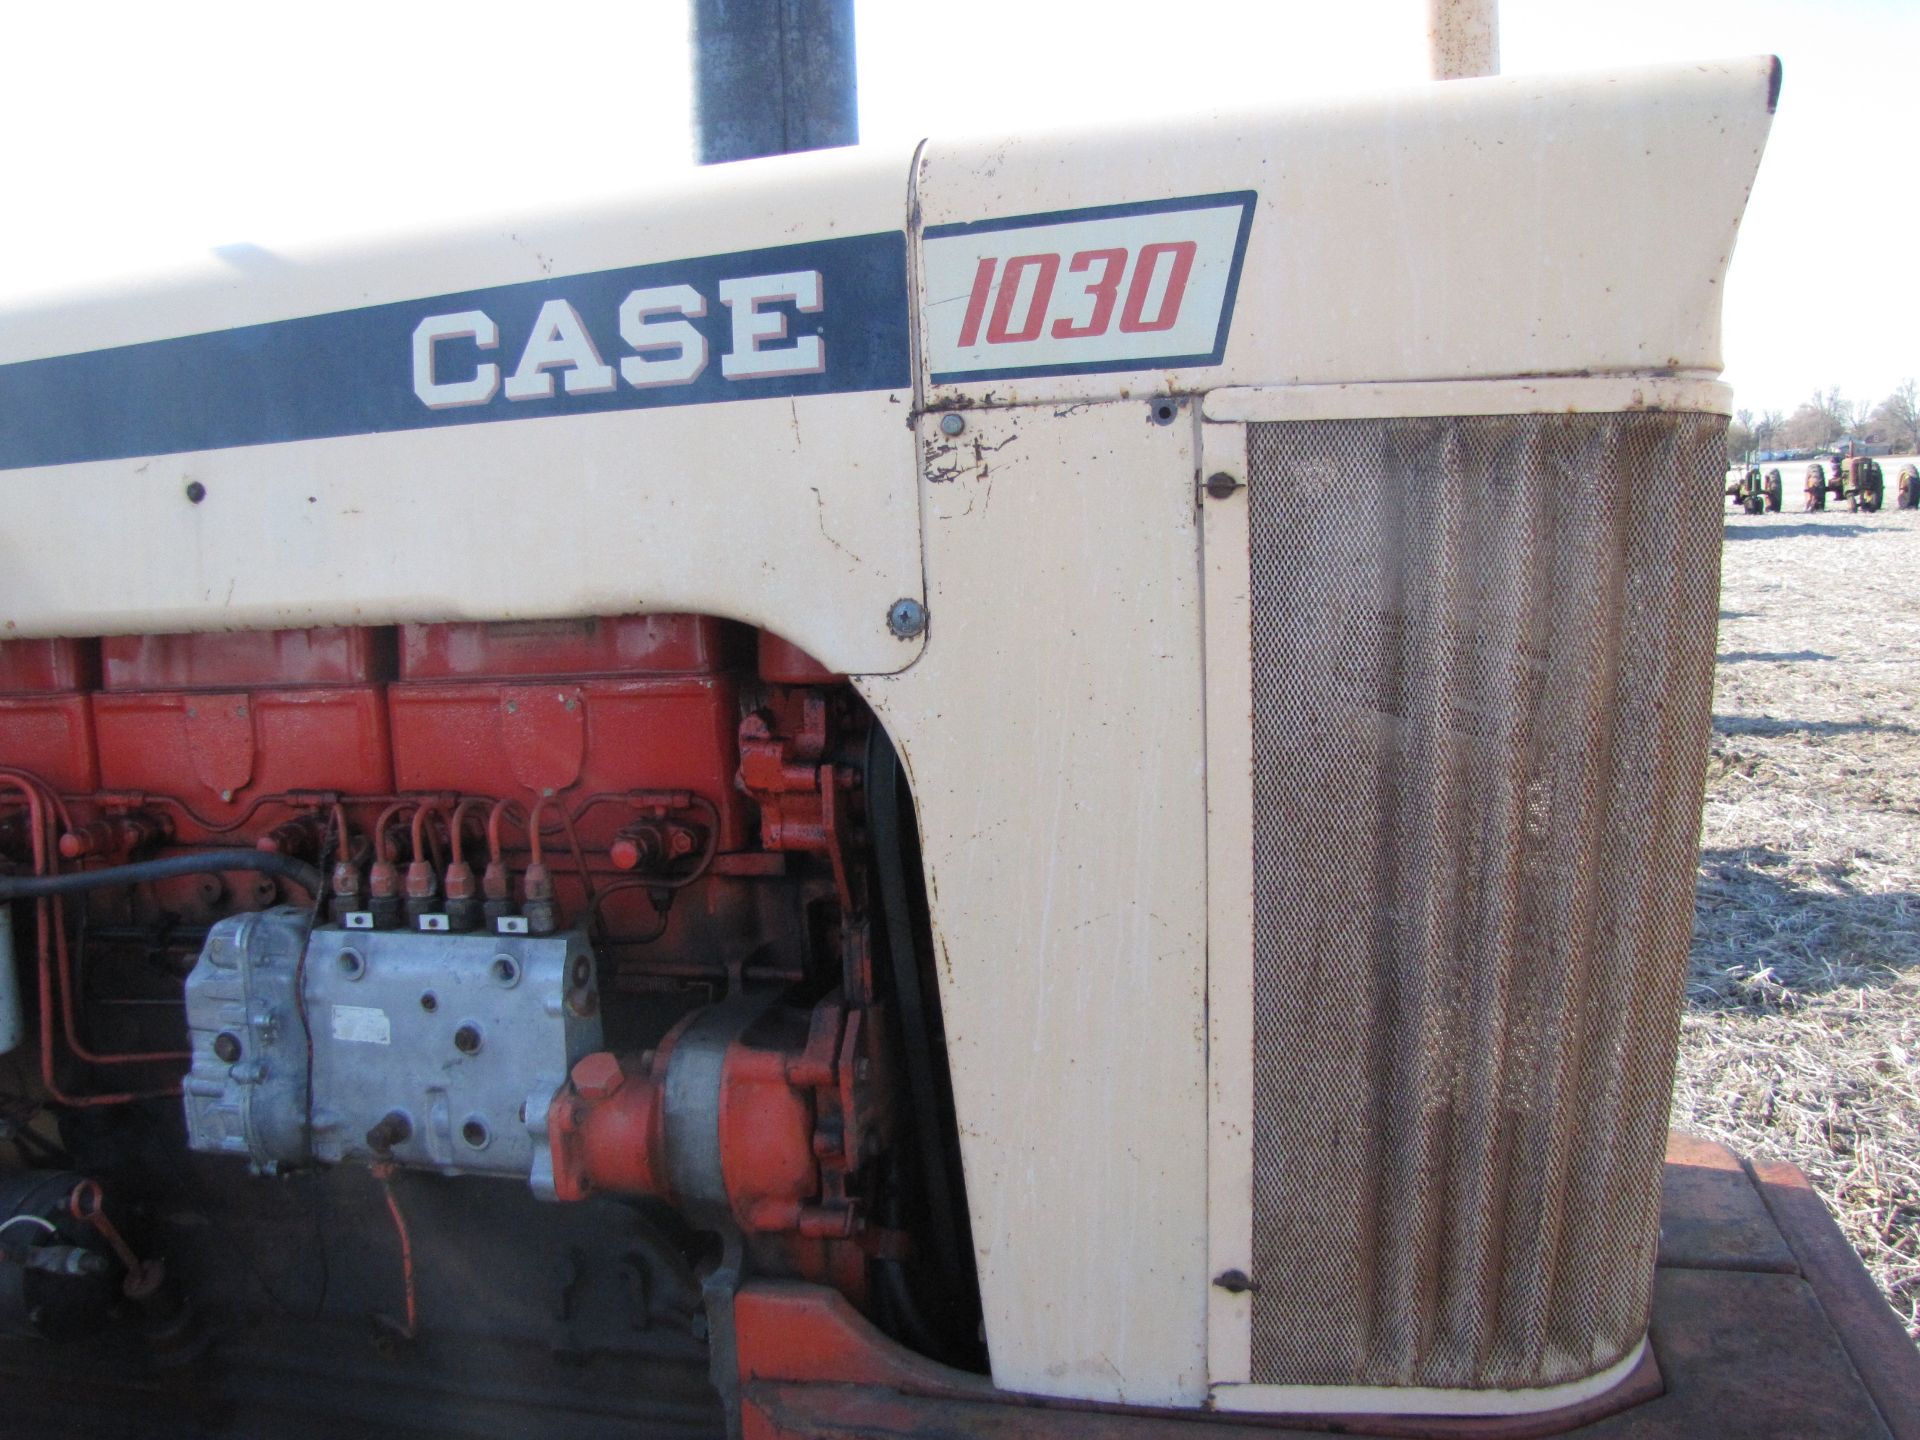 Case 1030 Tractor - Image 35 of 46